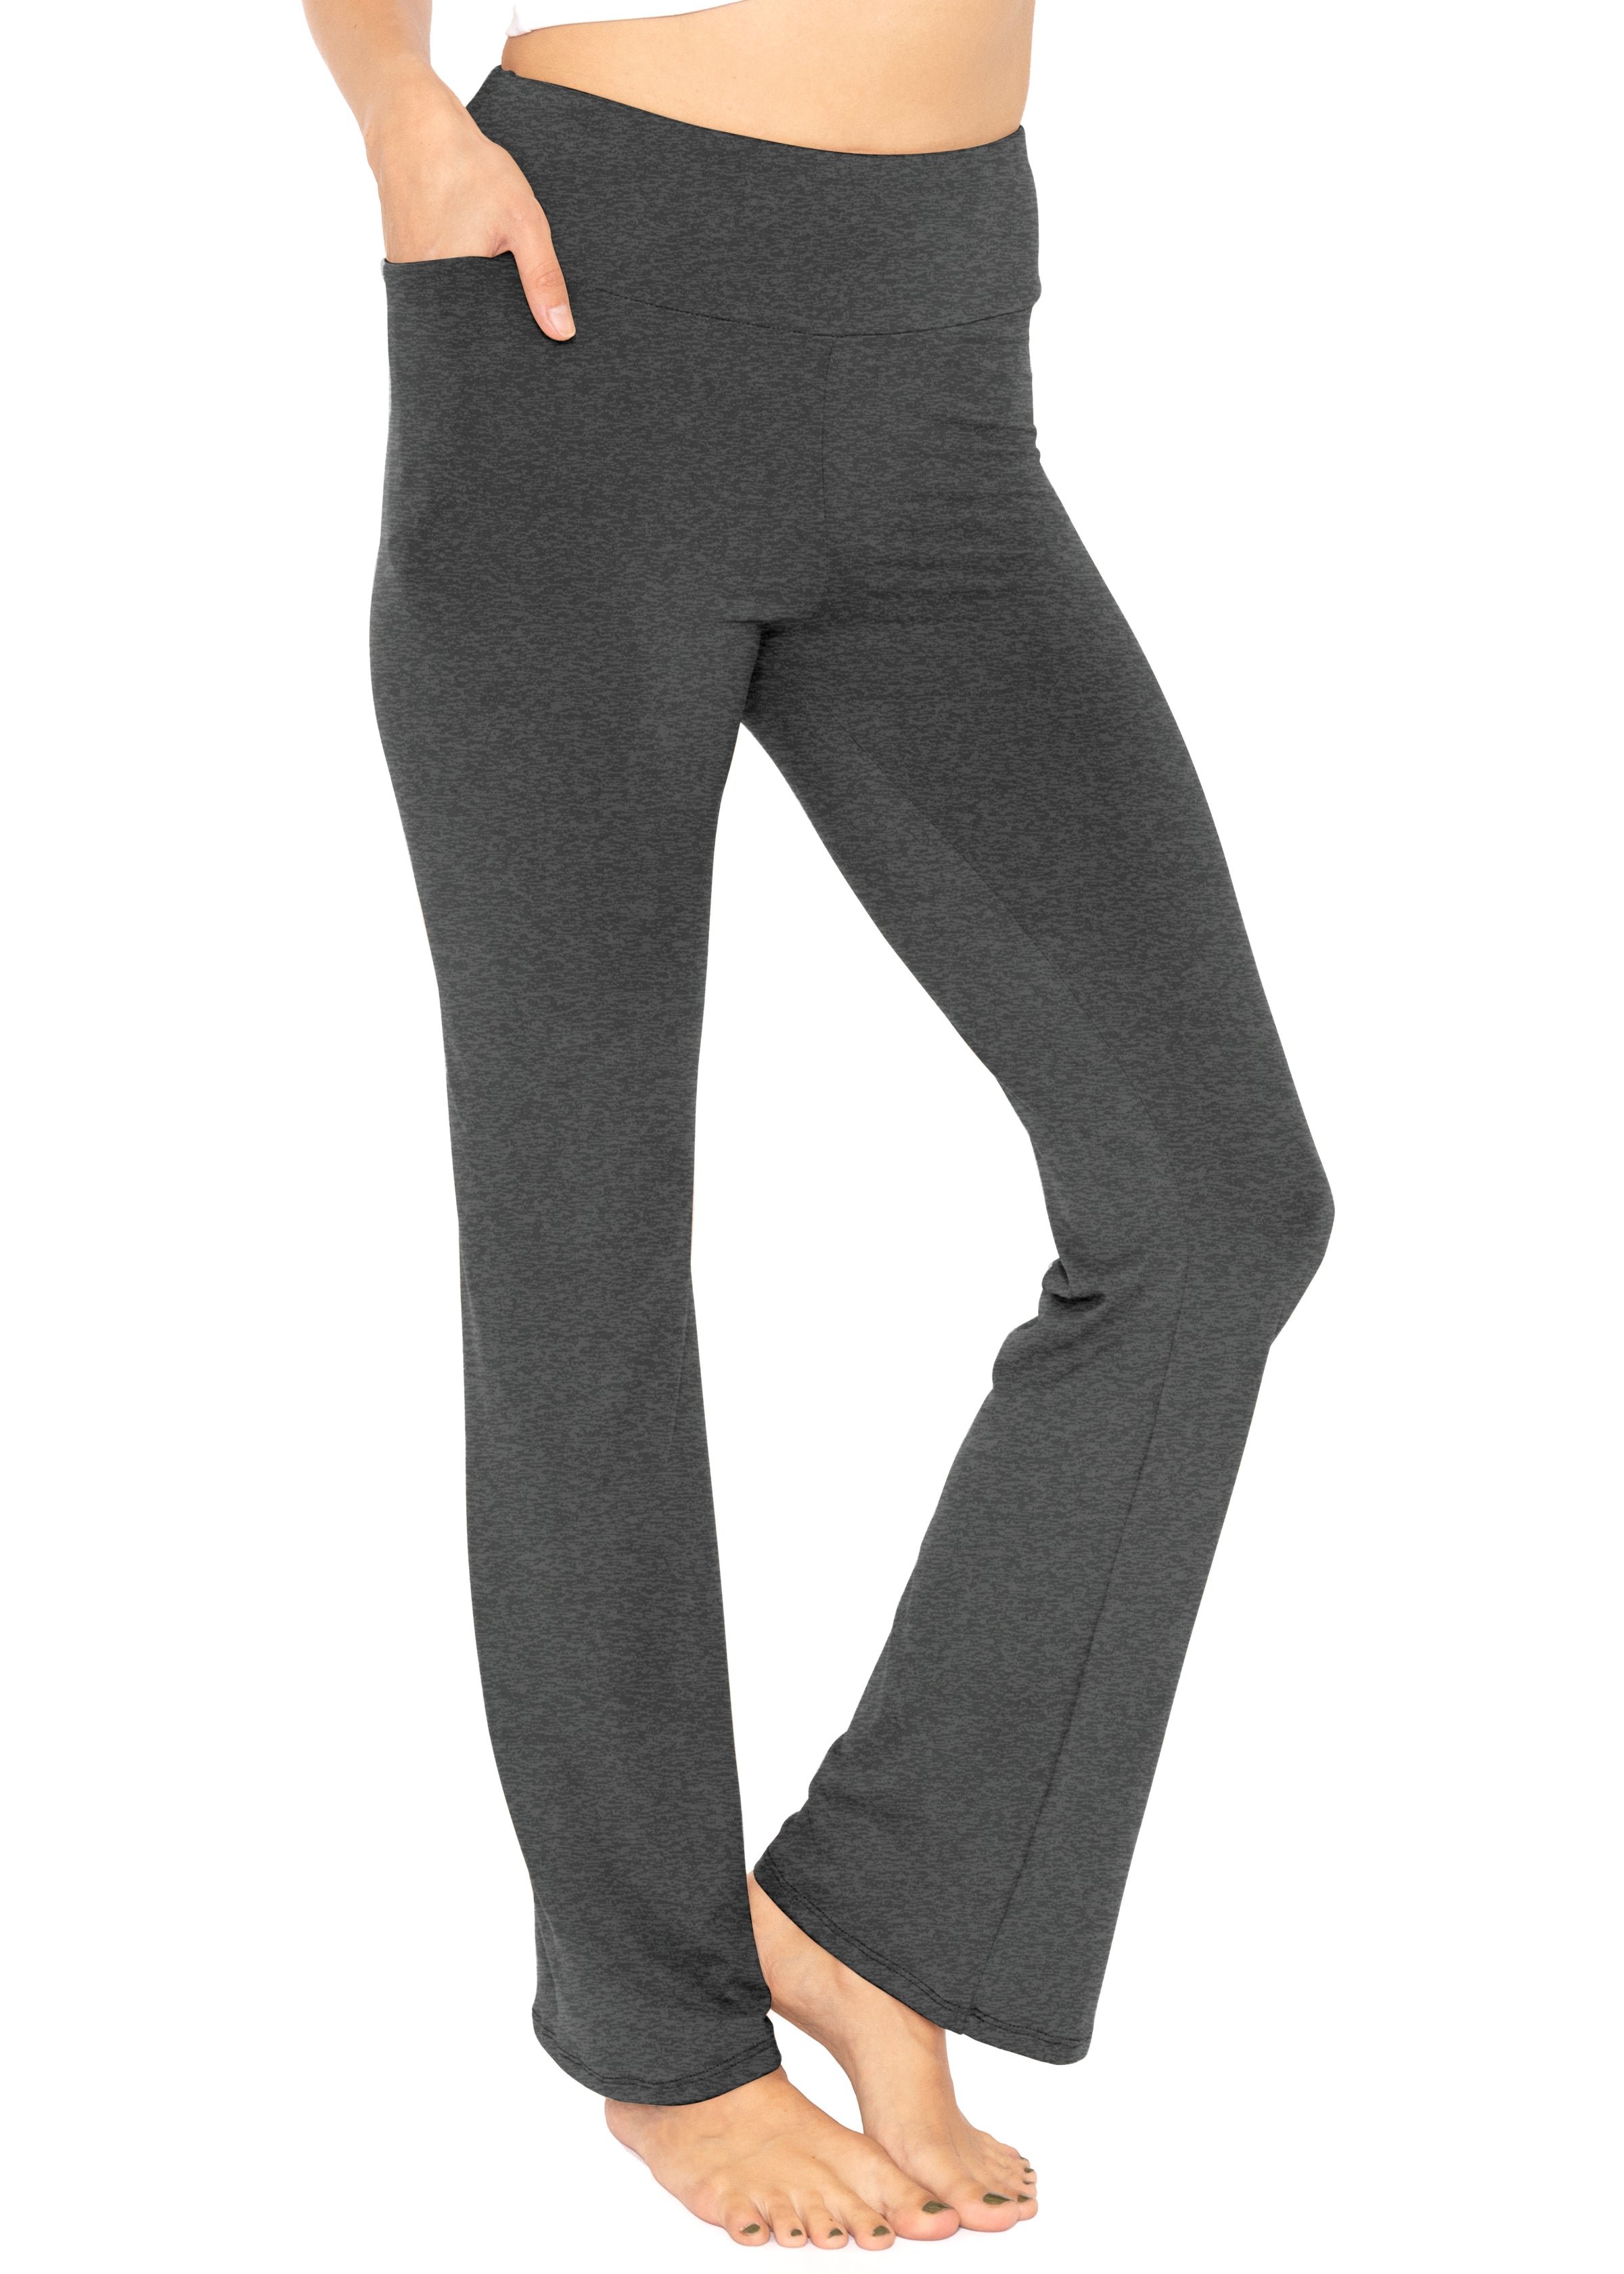 These comfy boot-cut yoga pants have pockets — and they're down to